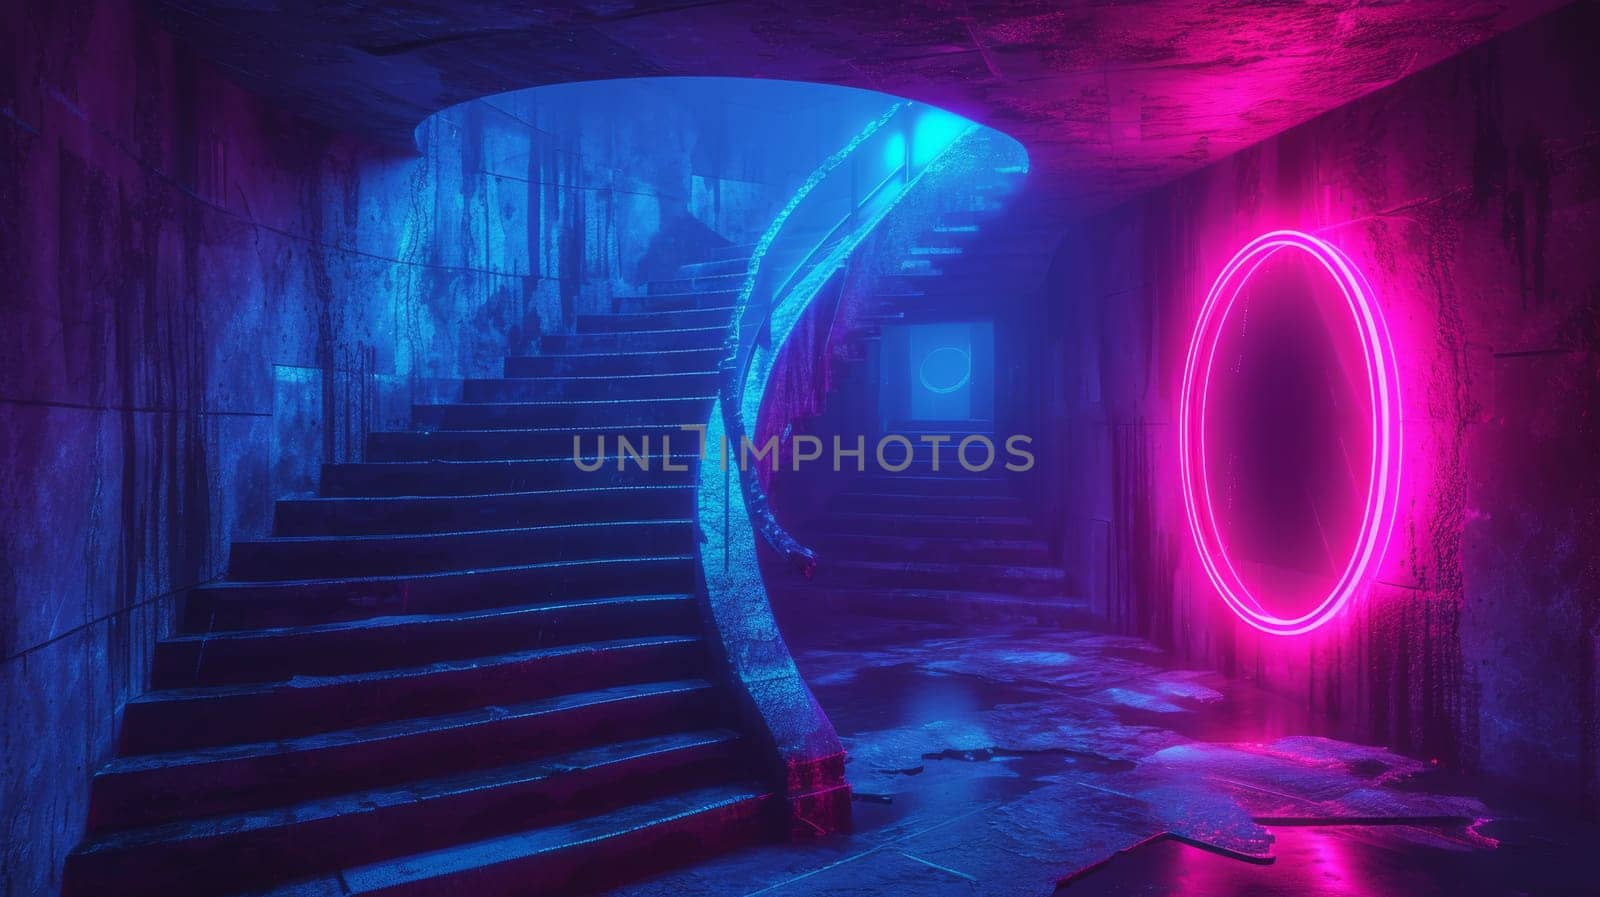 A stairway with a neon light and circular door in the middle